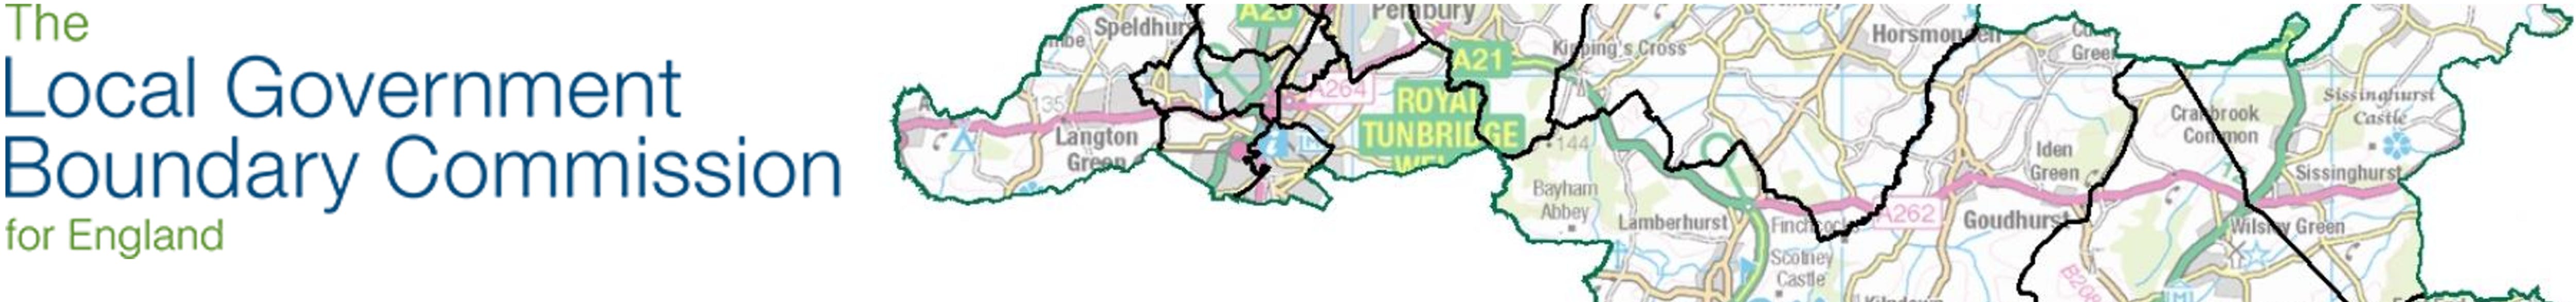 The local government boundary commission for England